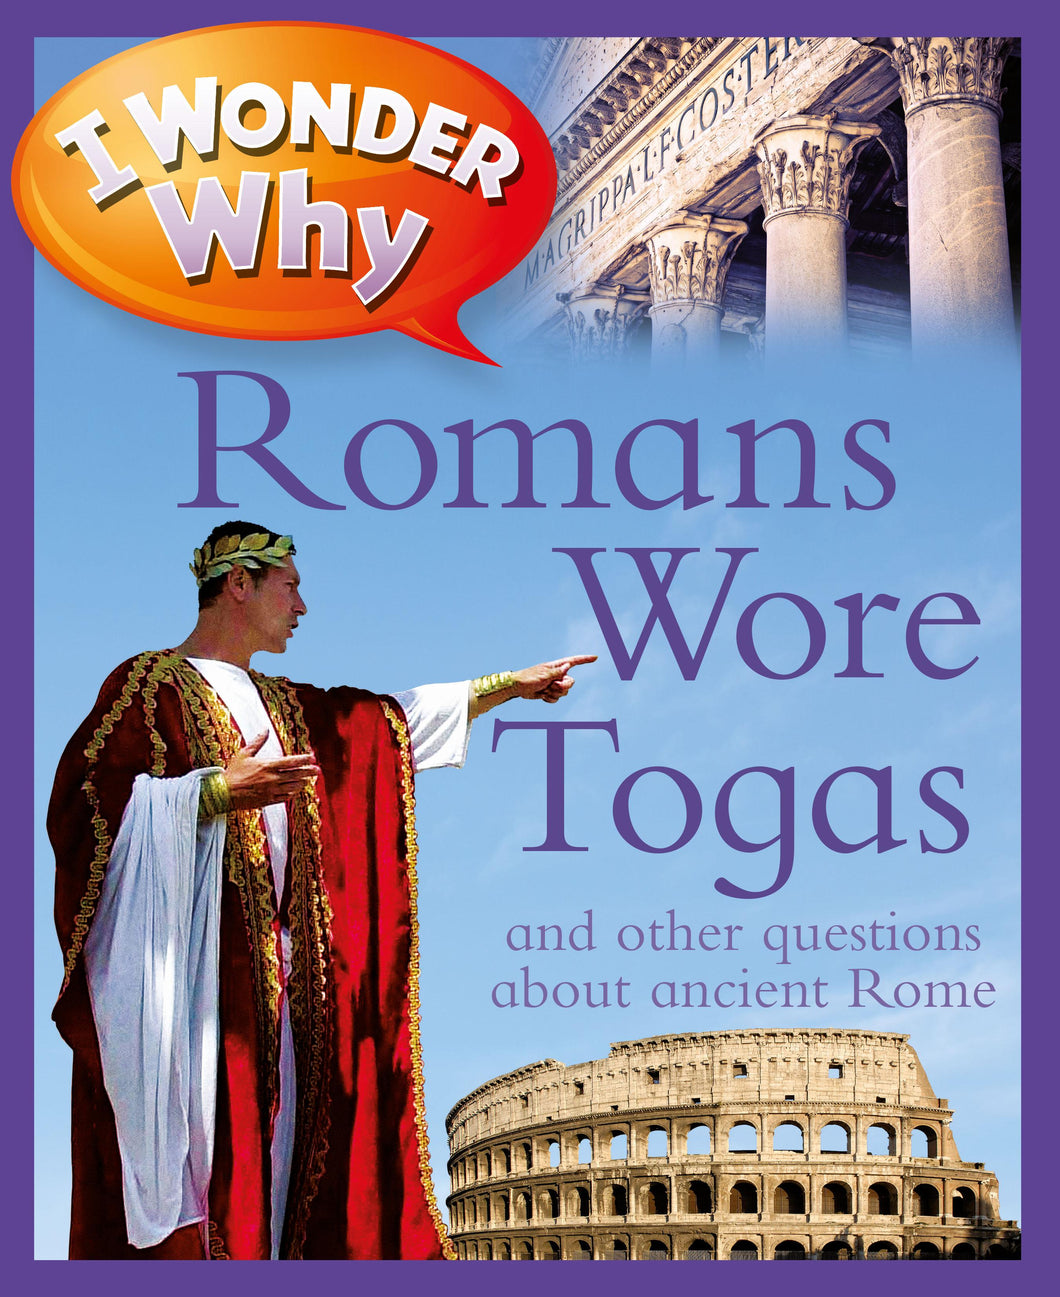 I Wonder Why: Romans Wore Togas and other questions about Ancient Rome